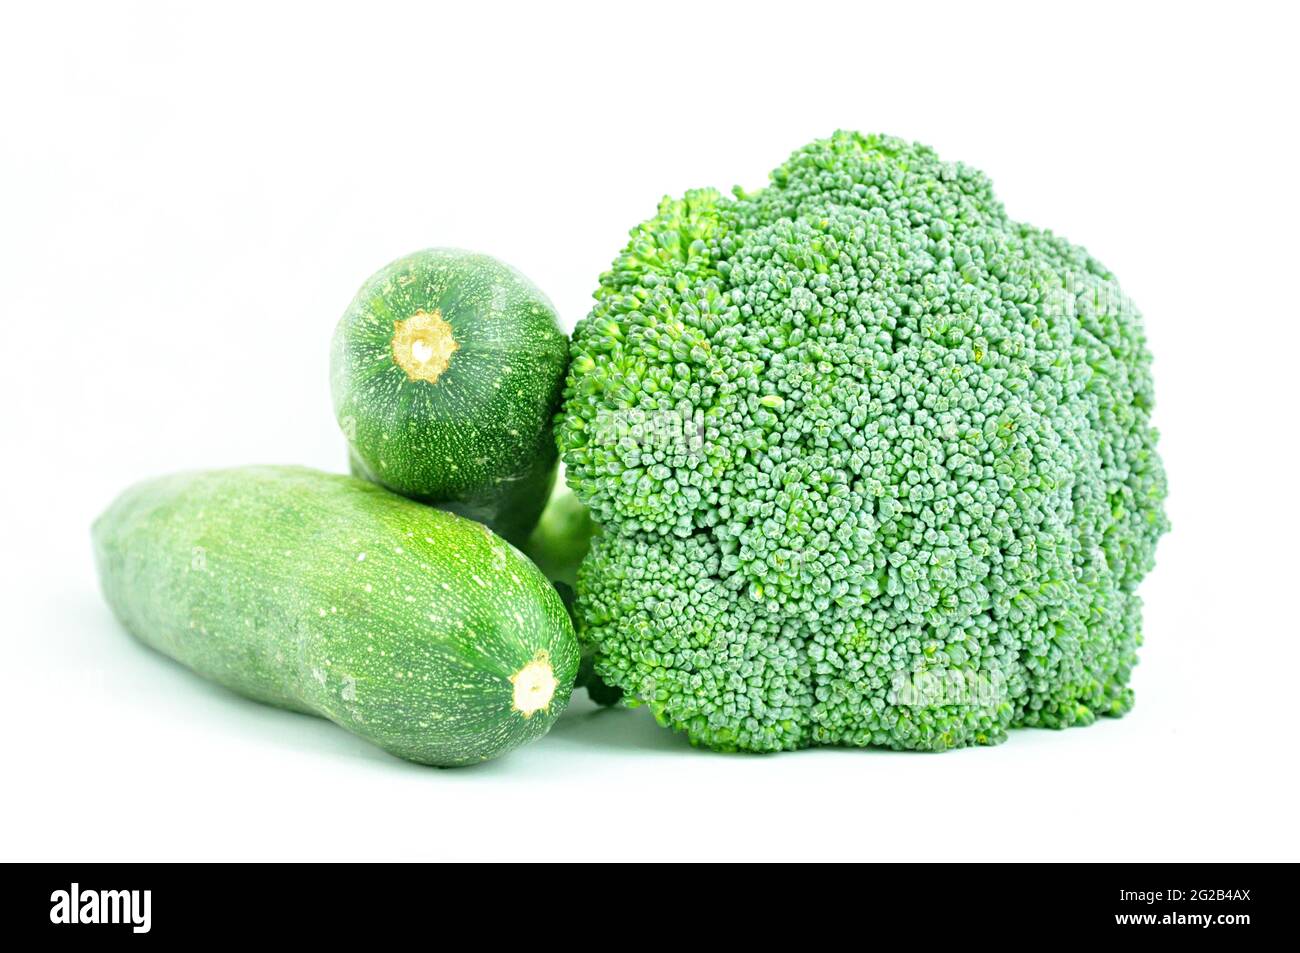 Broccoli and zucchinis on white background Stock Photo